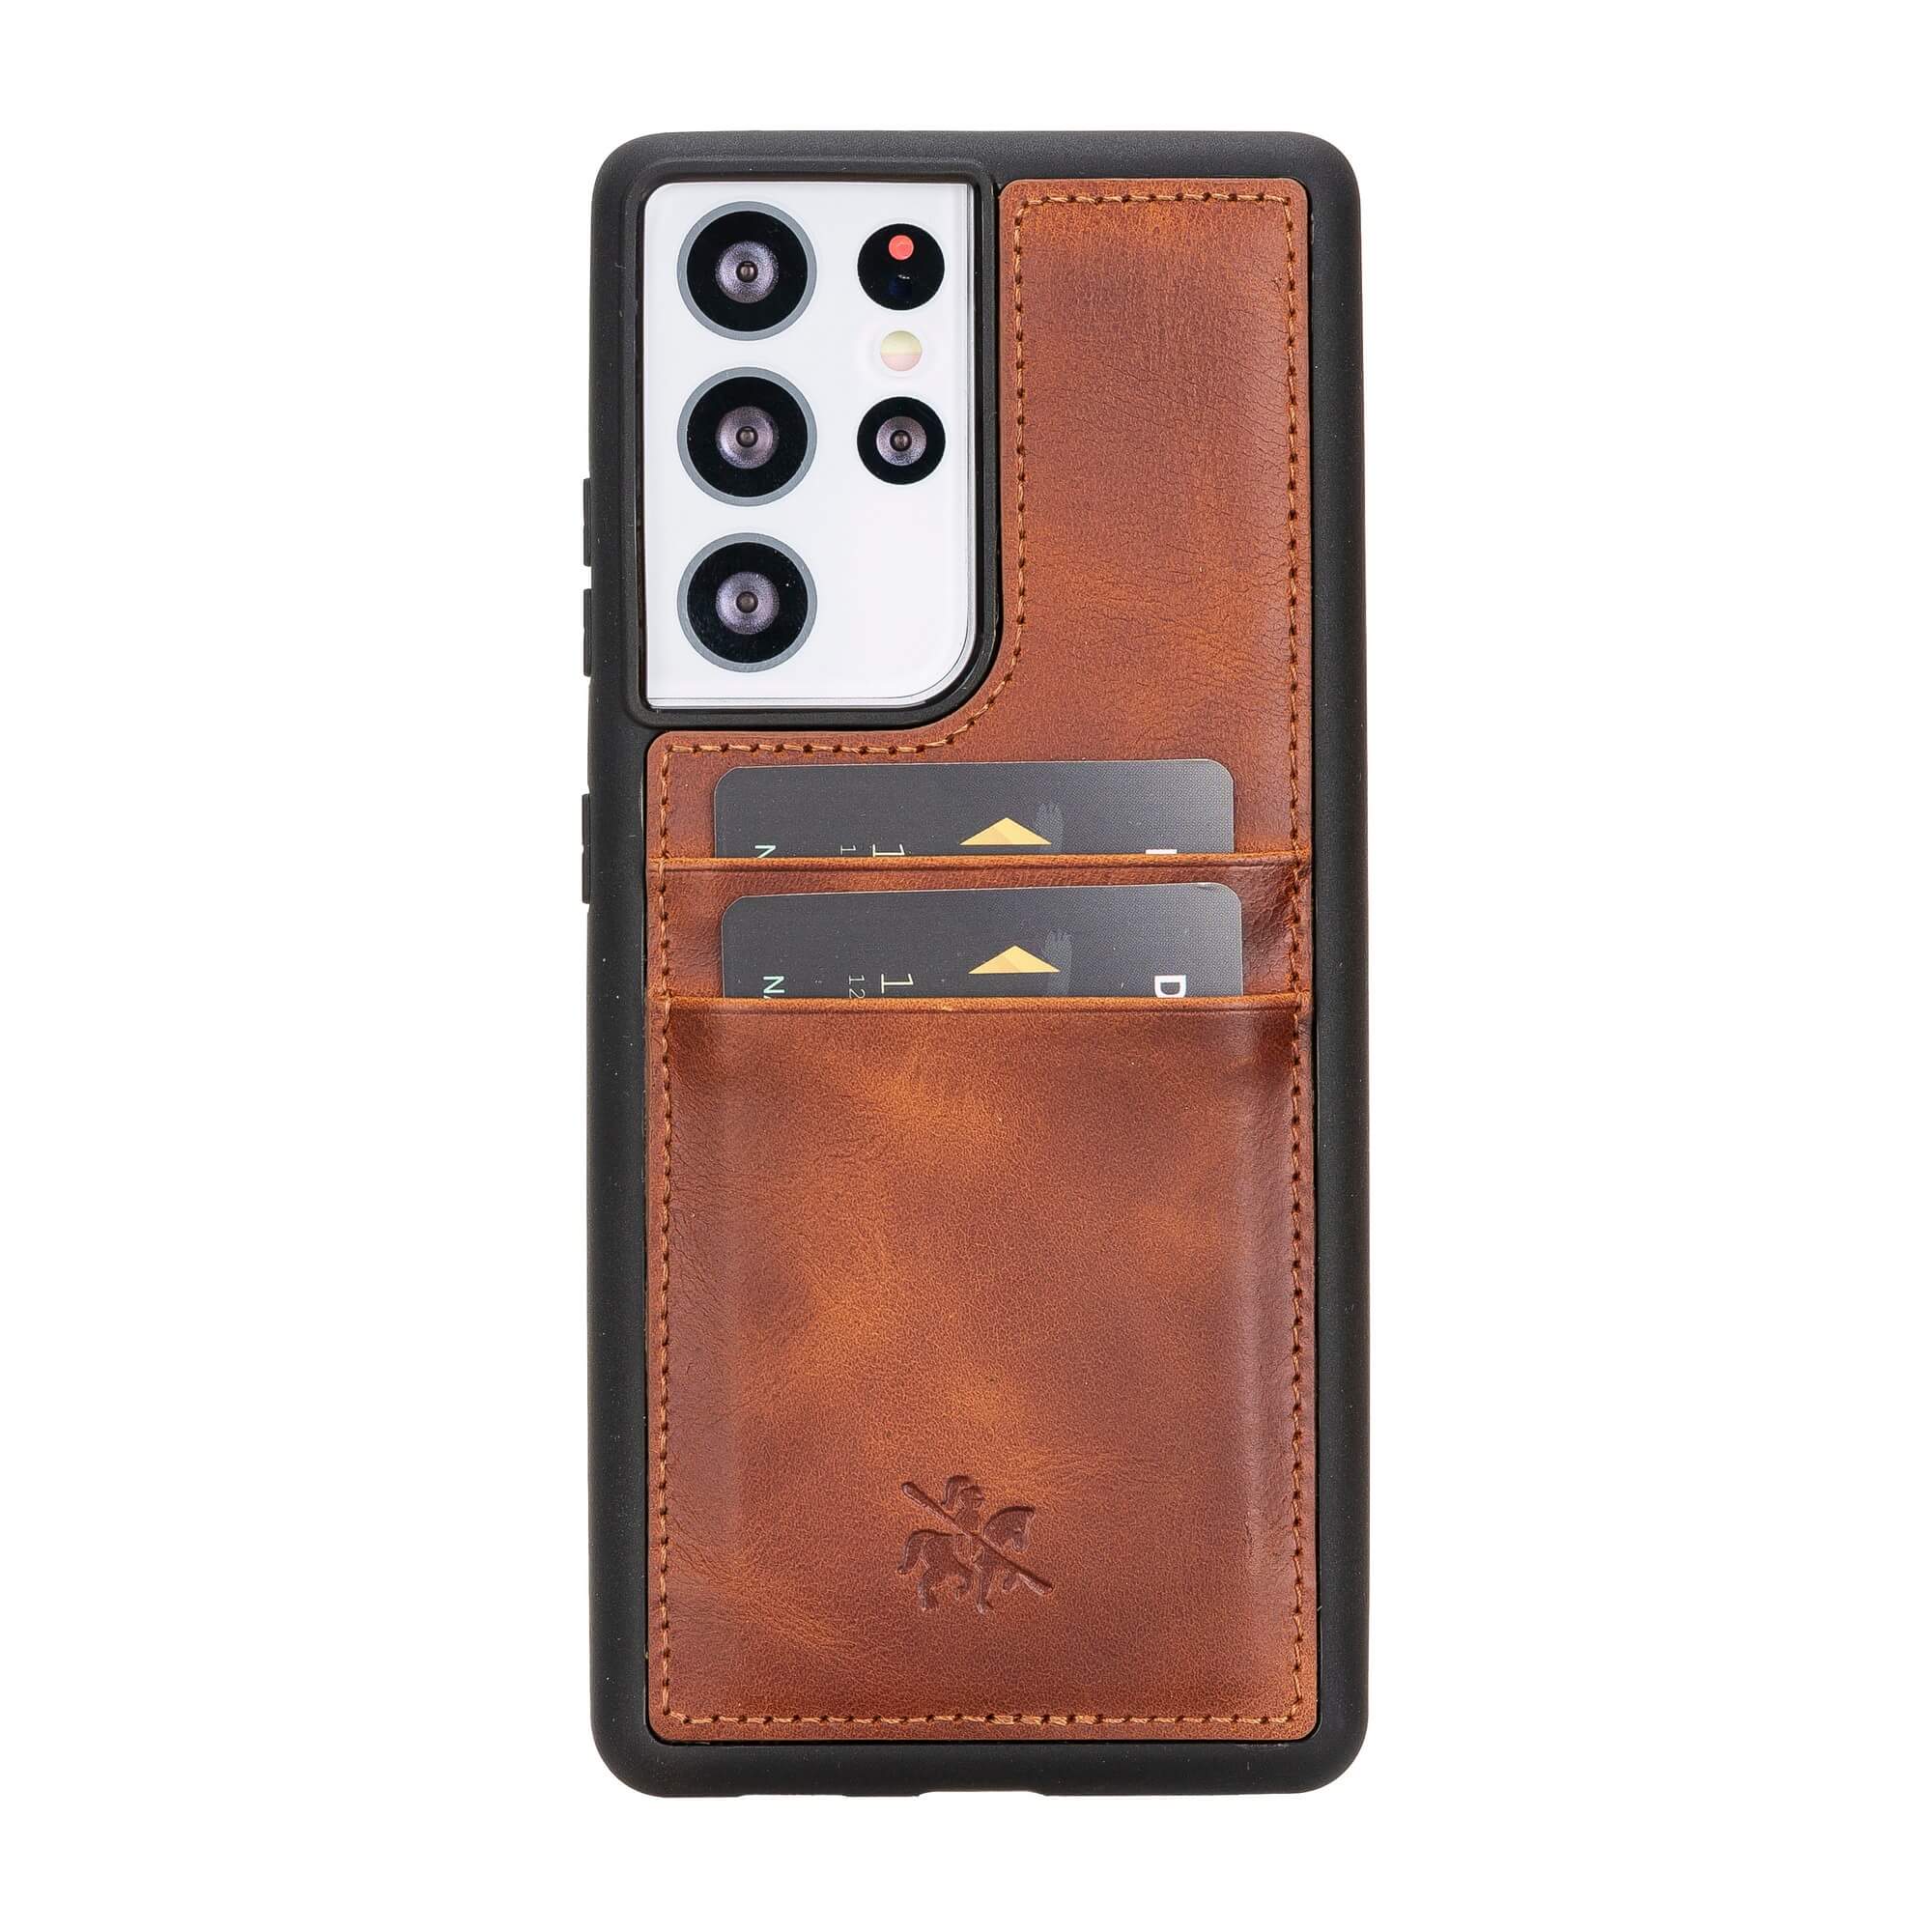 Samsung Galaxy S21 Ultra Leather Cases Venito Leather